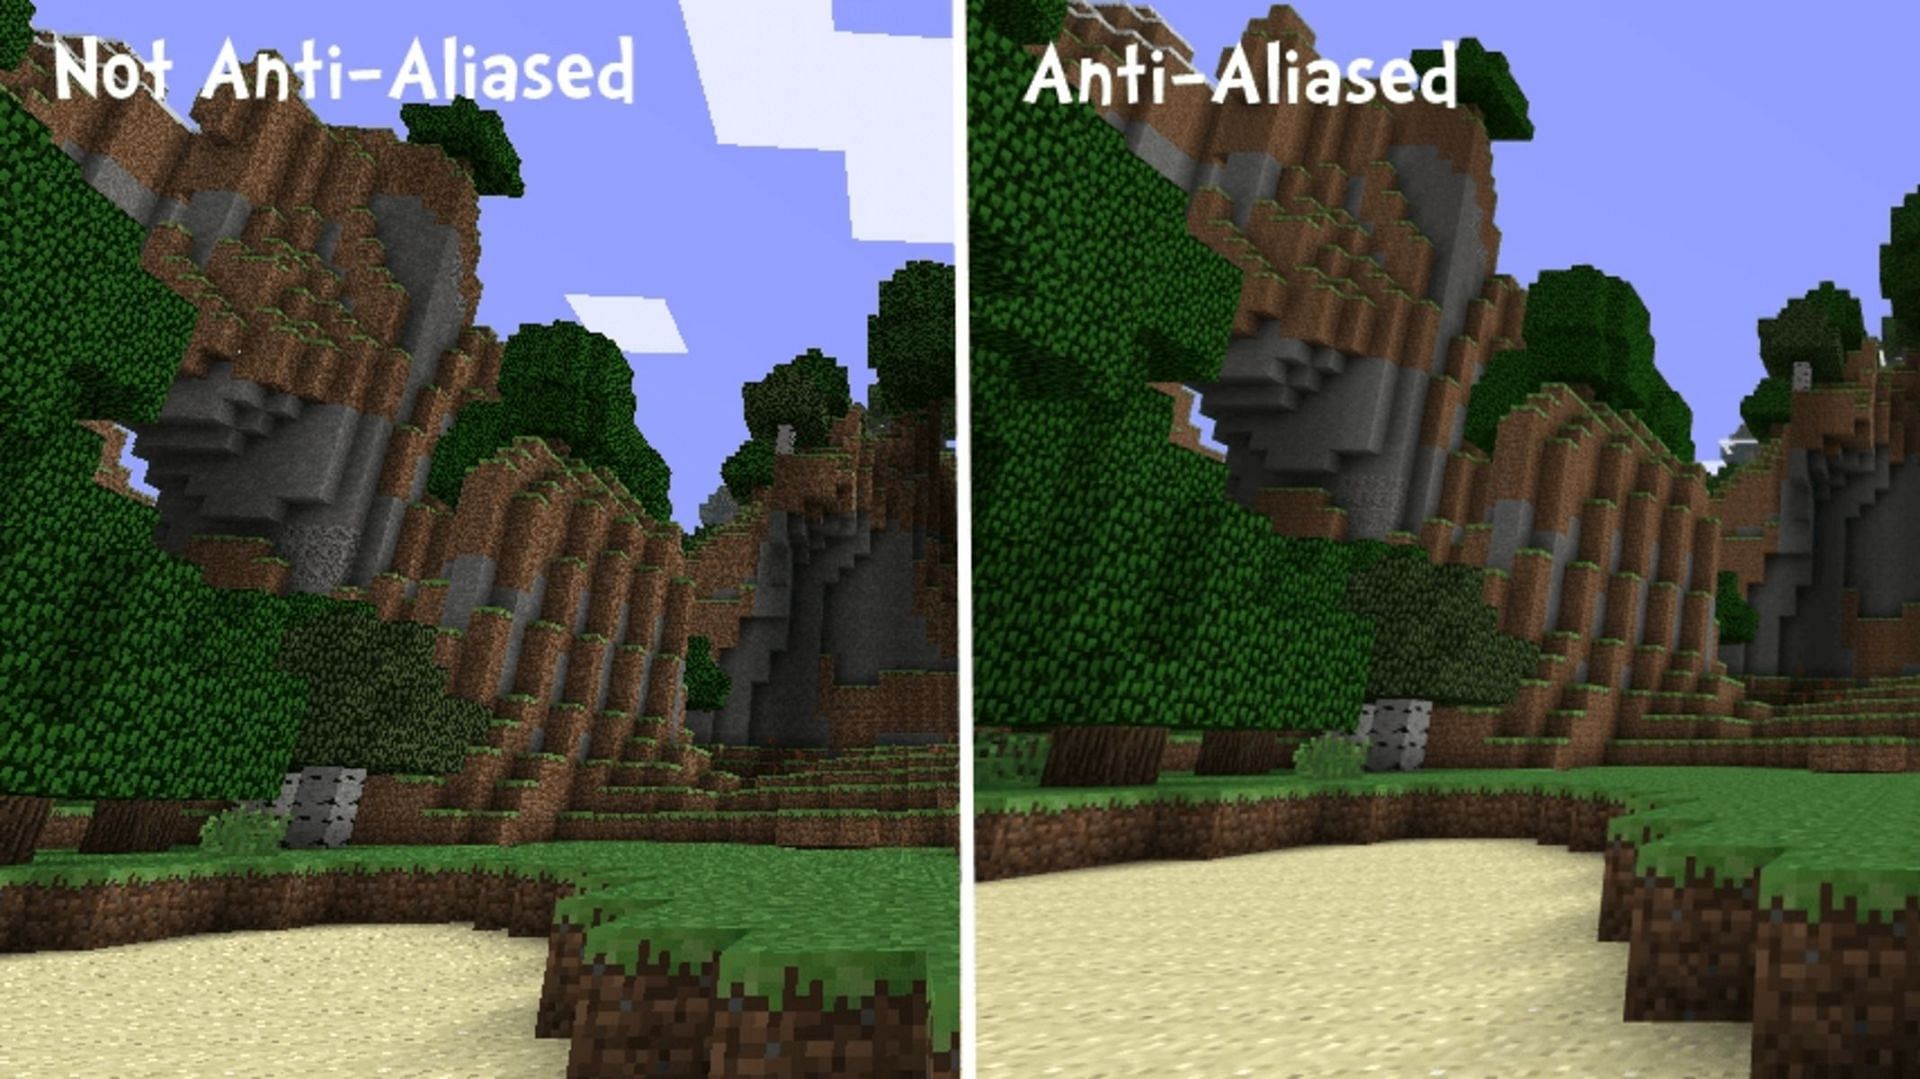 Anti-aliasing smooths the edges of the blocks rendered in-game as well as other things like items (Image via Mojang)